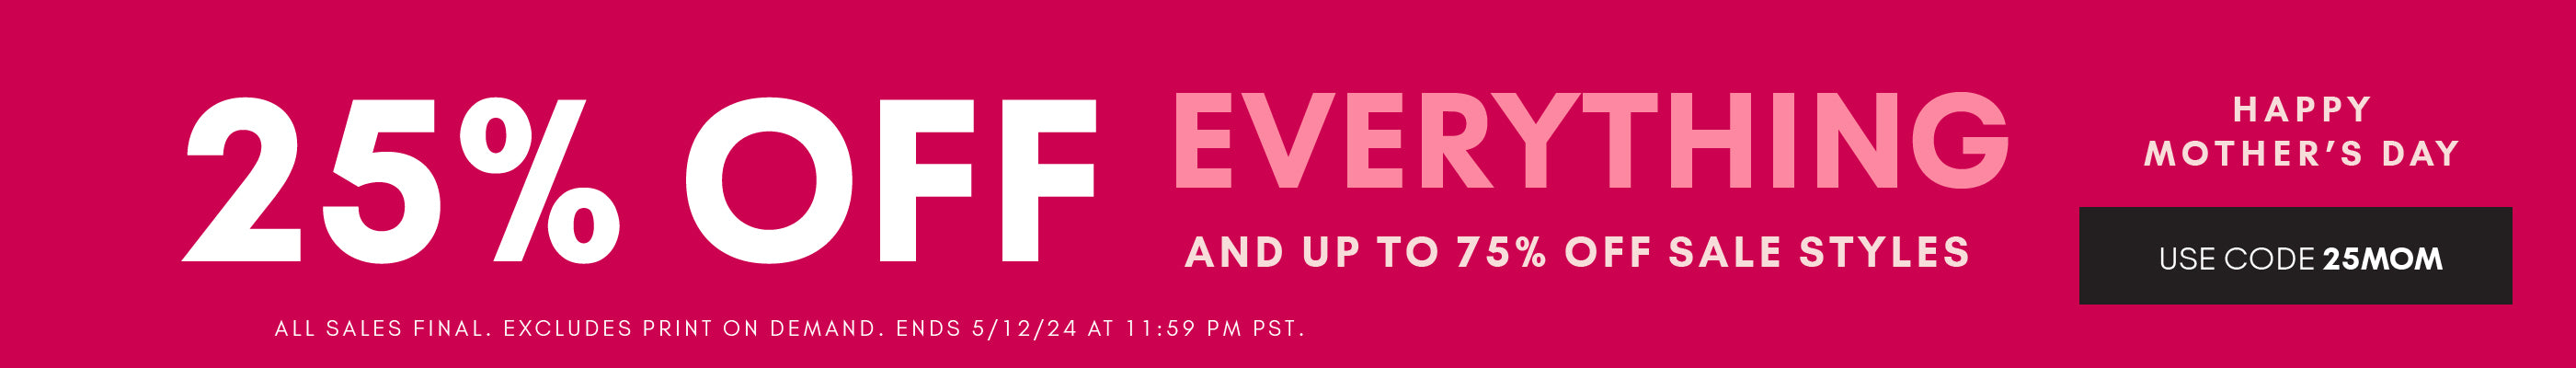 25% OFF Everything. Happy Mother's Day. And up to 75% OFF Sale. use code 25MOM. Ends 5/12/24 at 11:59 PM PST. 